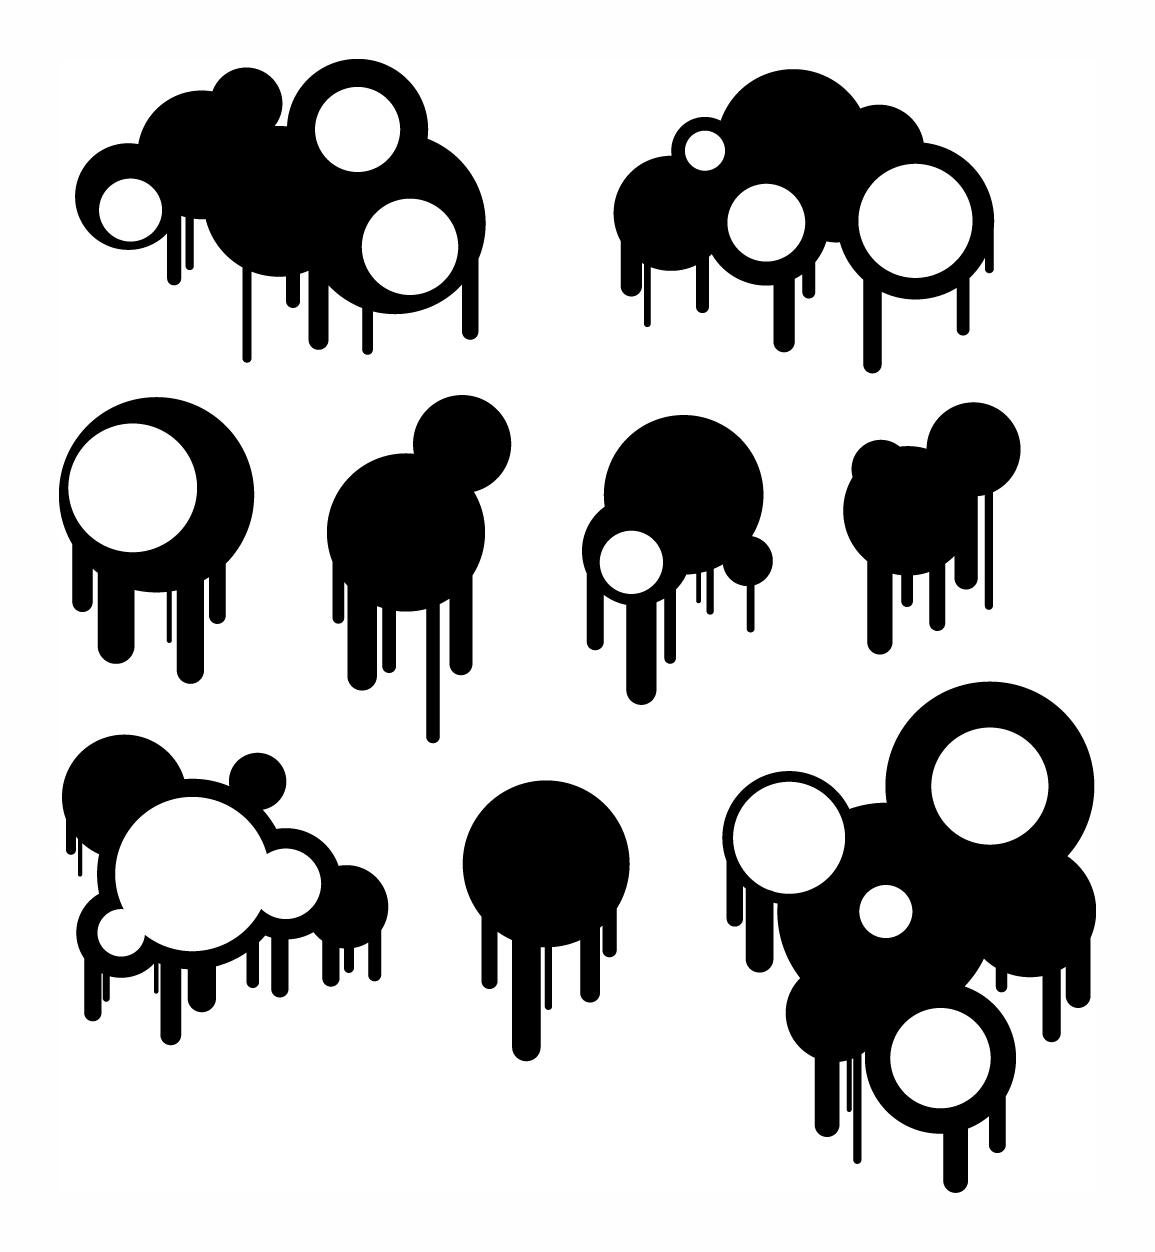 Circles and Drips - Brushes